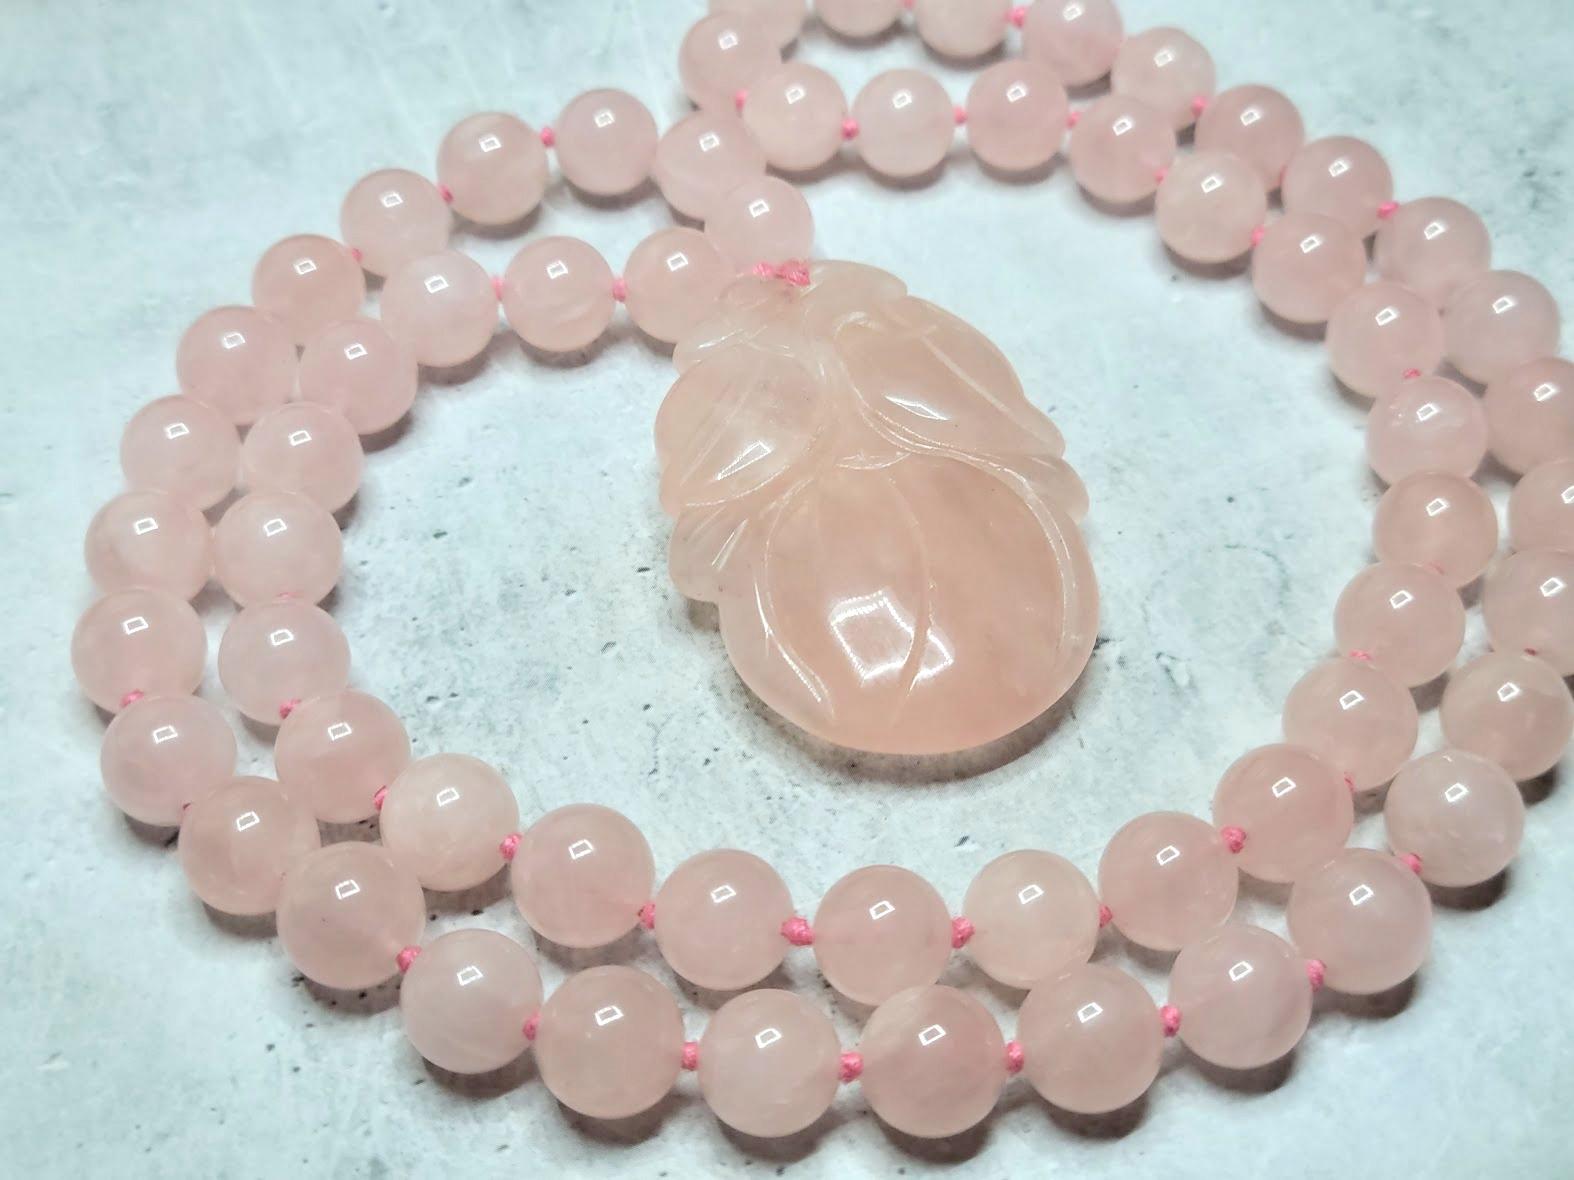 A vintage estate natural pink Chinese quartz carved pendant and bead necklace.
The quartz pendant is cut in fruit design and is strung on pink silk cotton with high-quality quartz beads. The carved quartz pendant is a peach and leaf design that